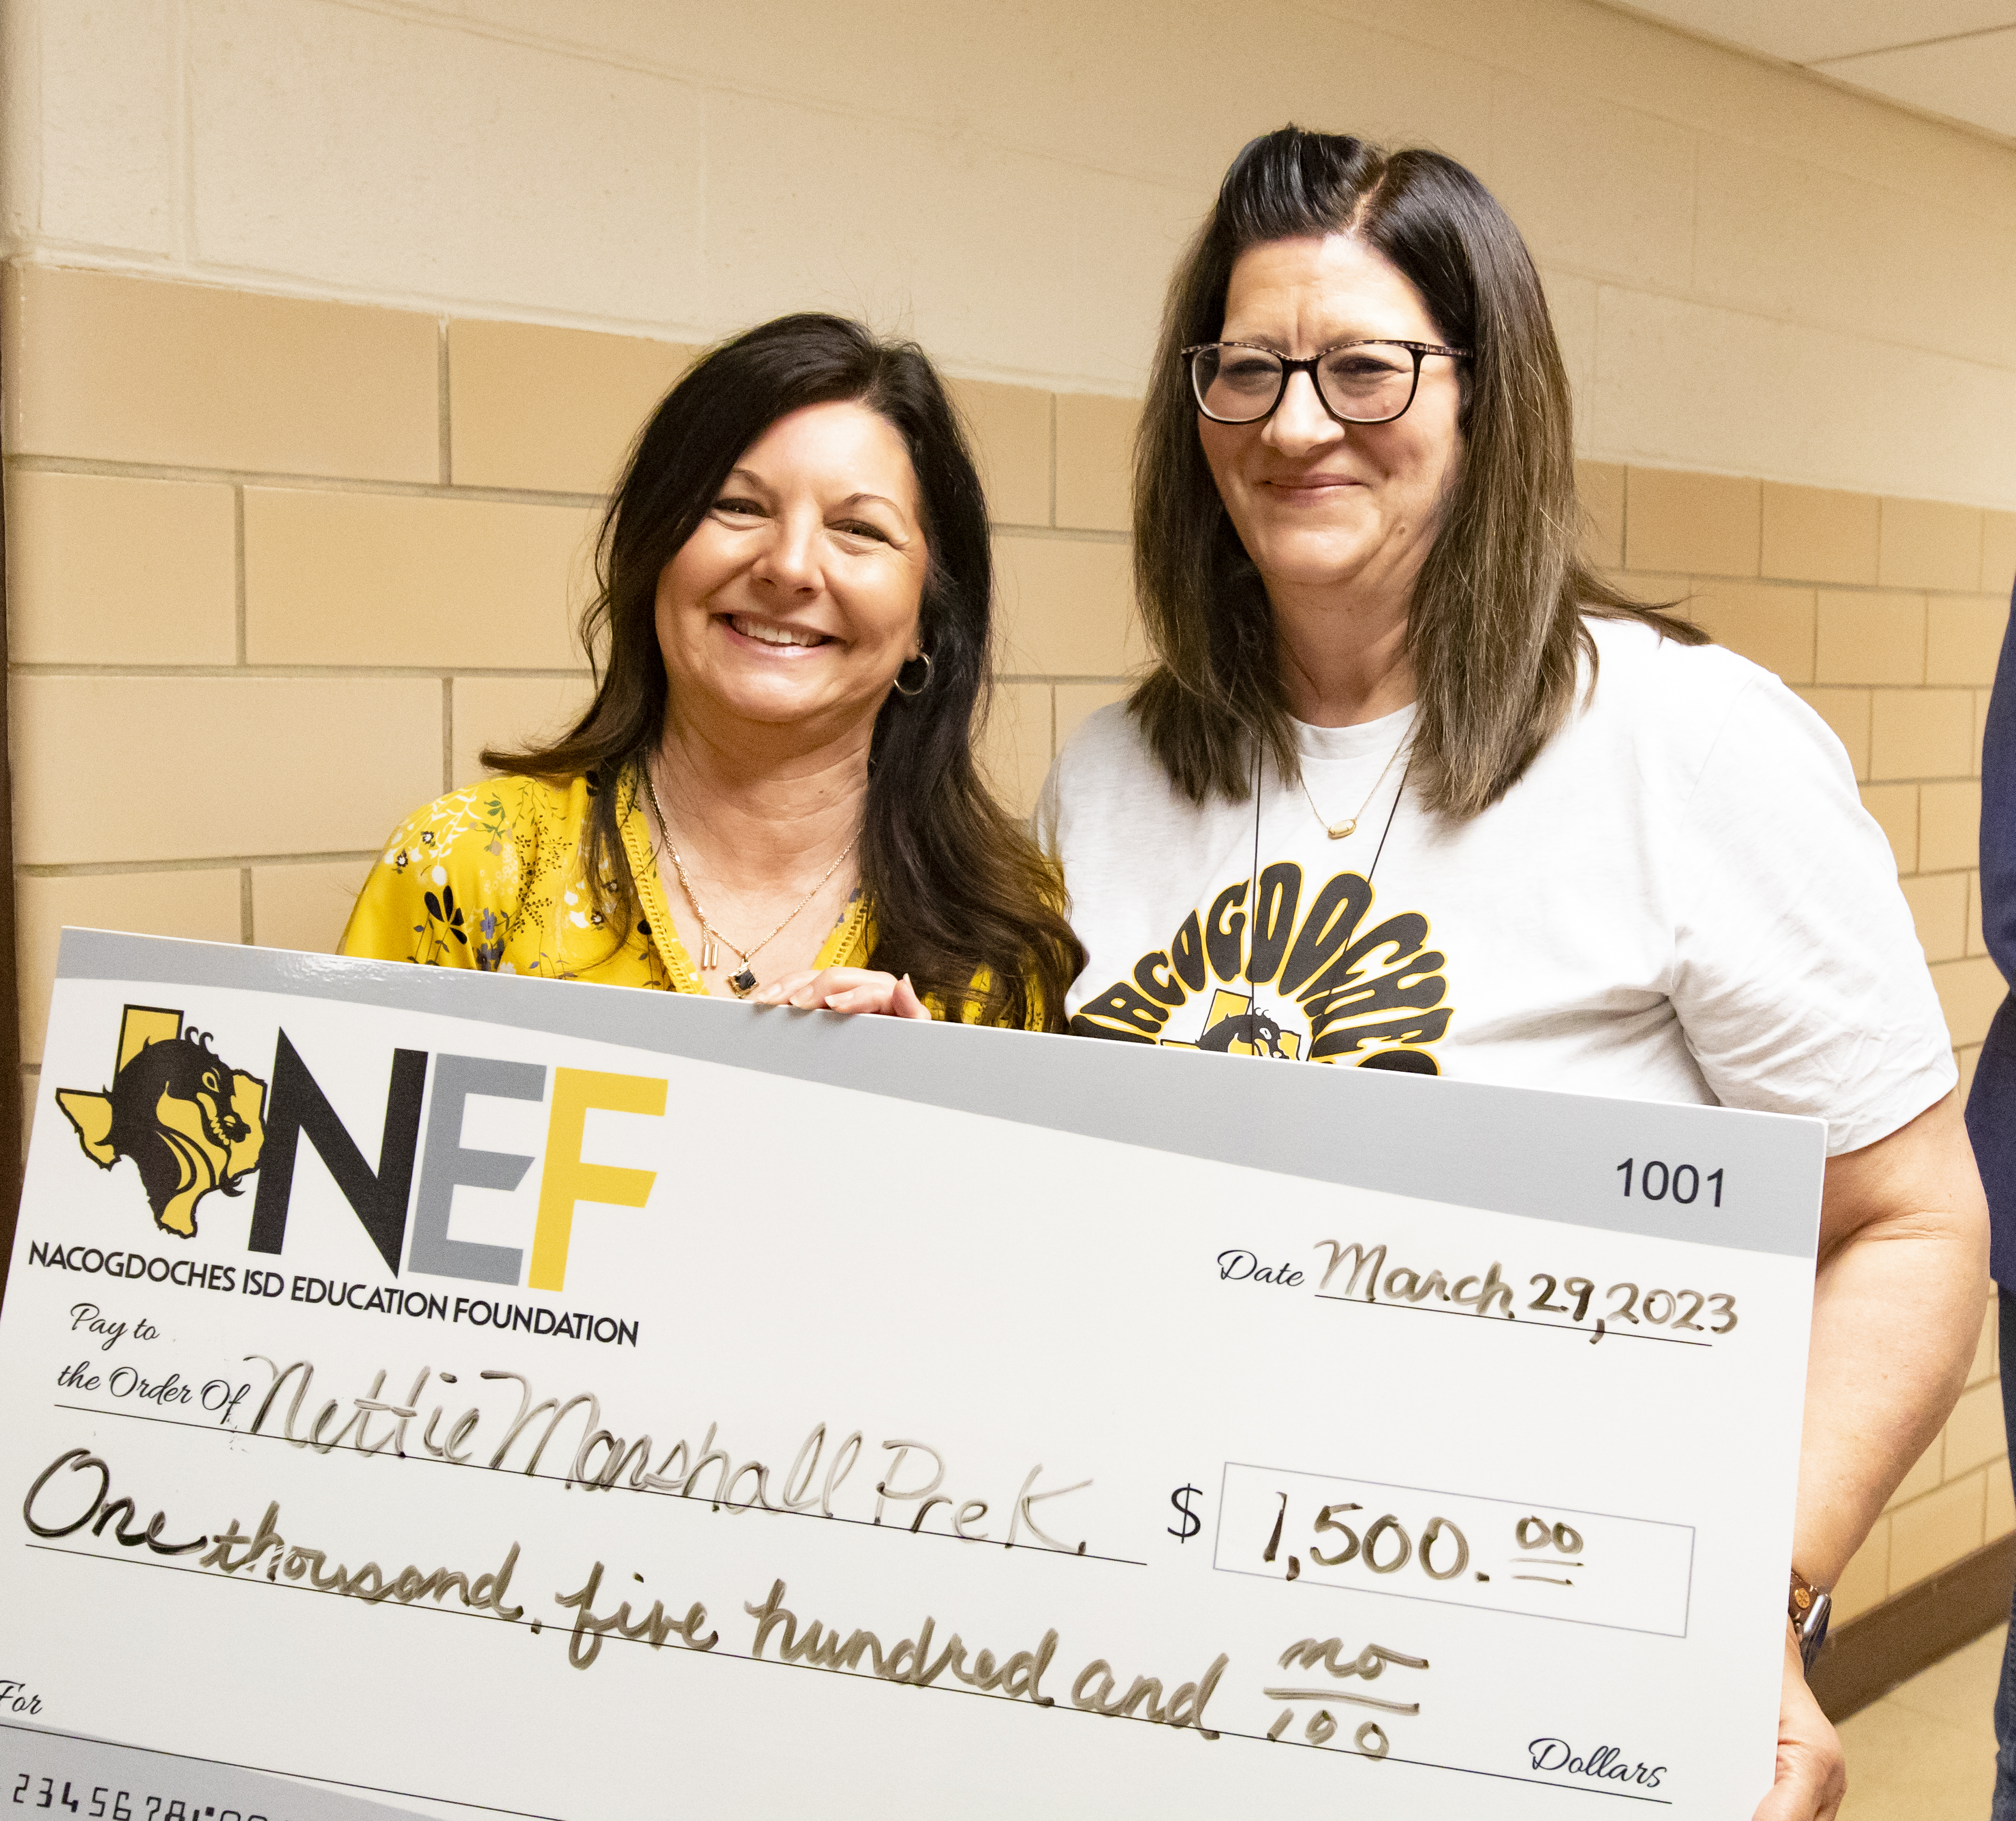 Nacogdoches ISD Education Foundation Executive Director Erin Windham (left) shown with Angela Edge